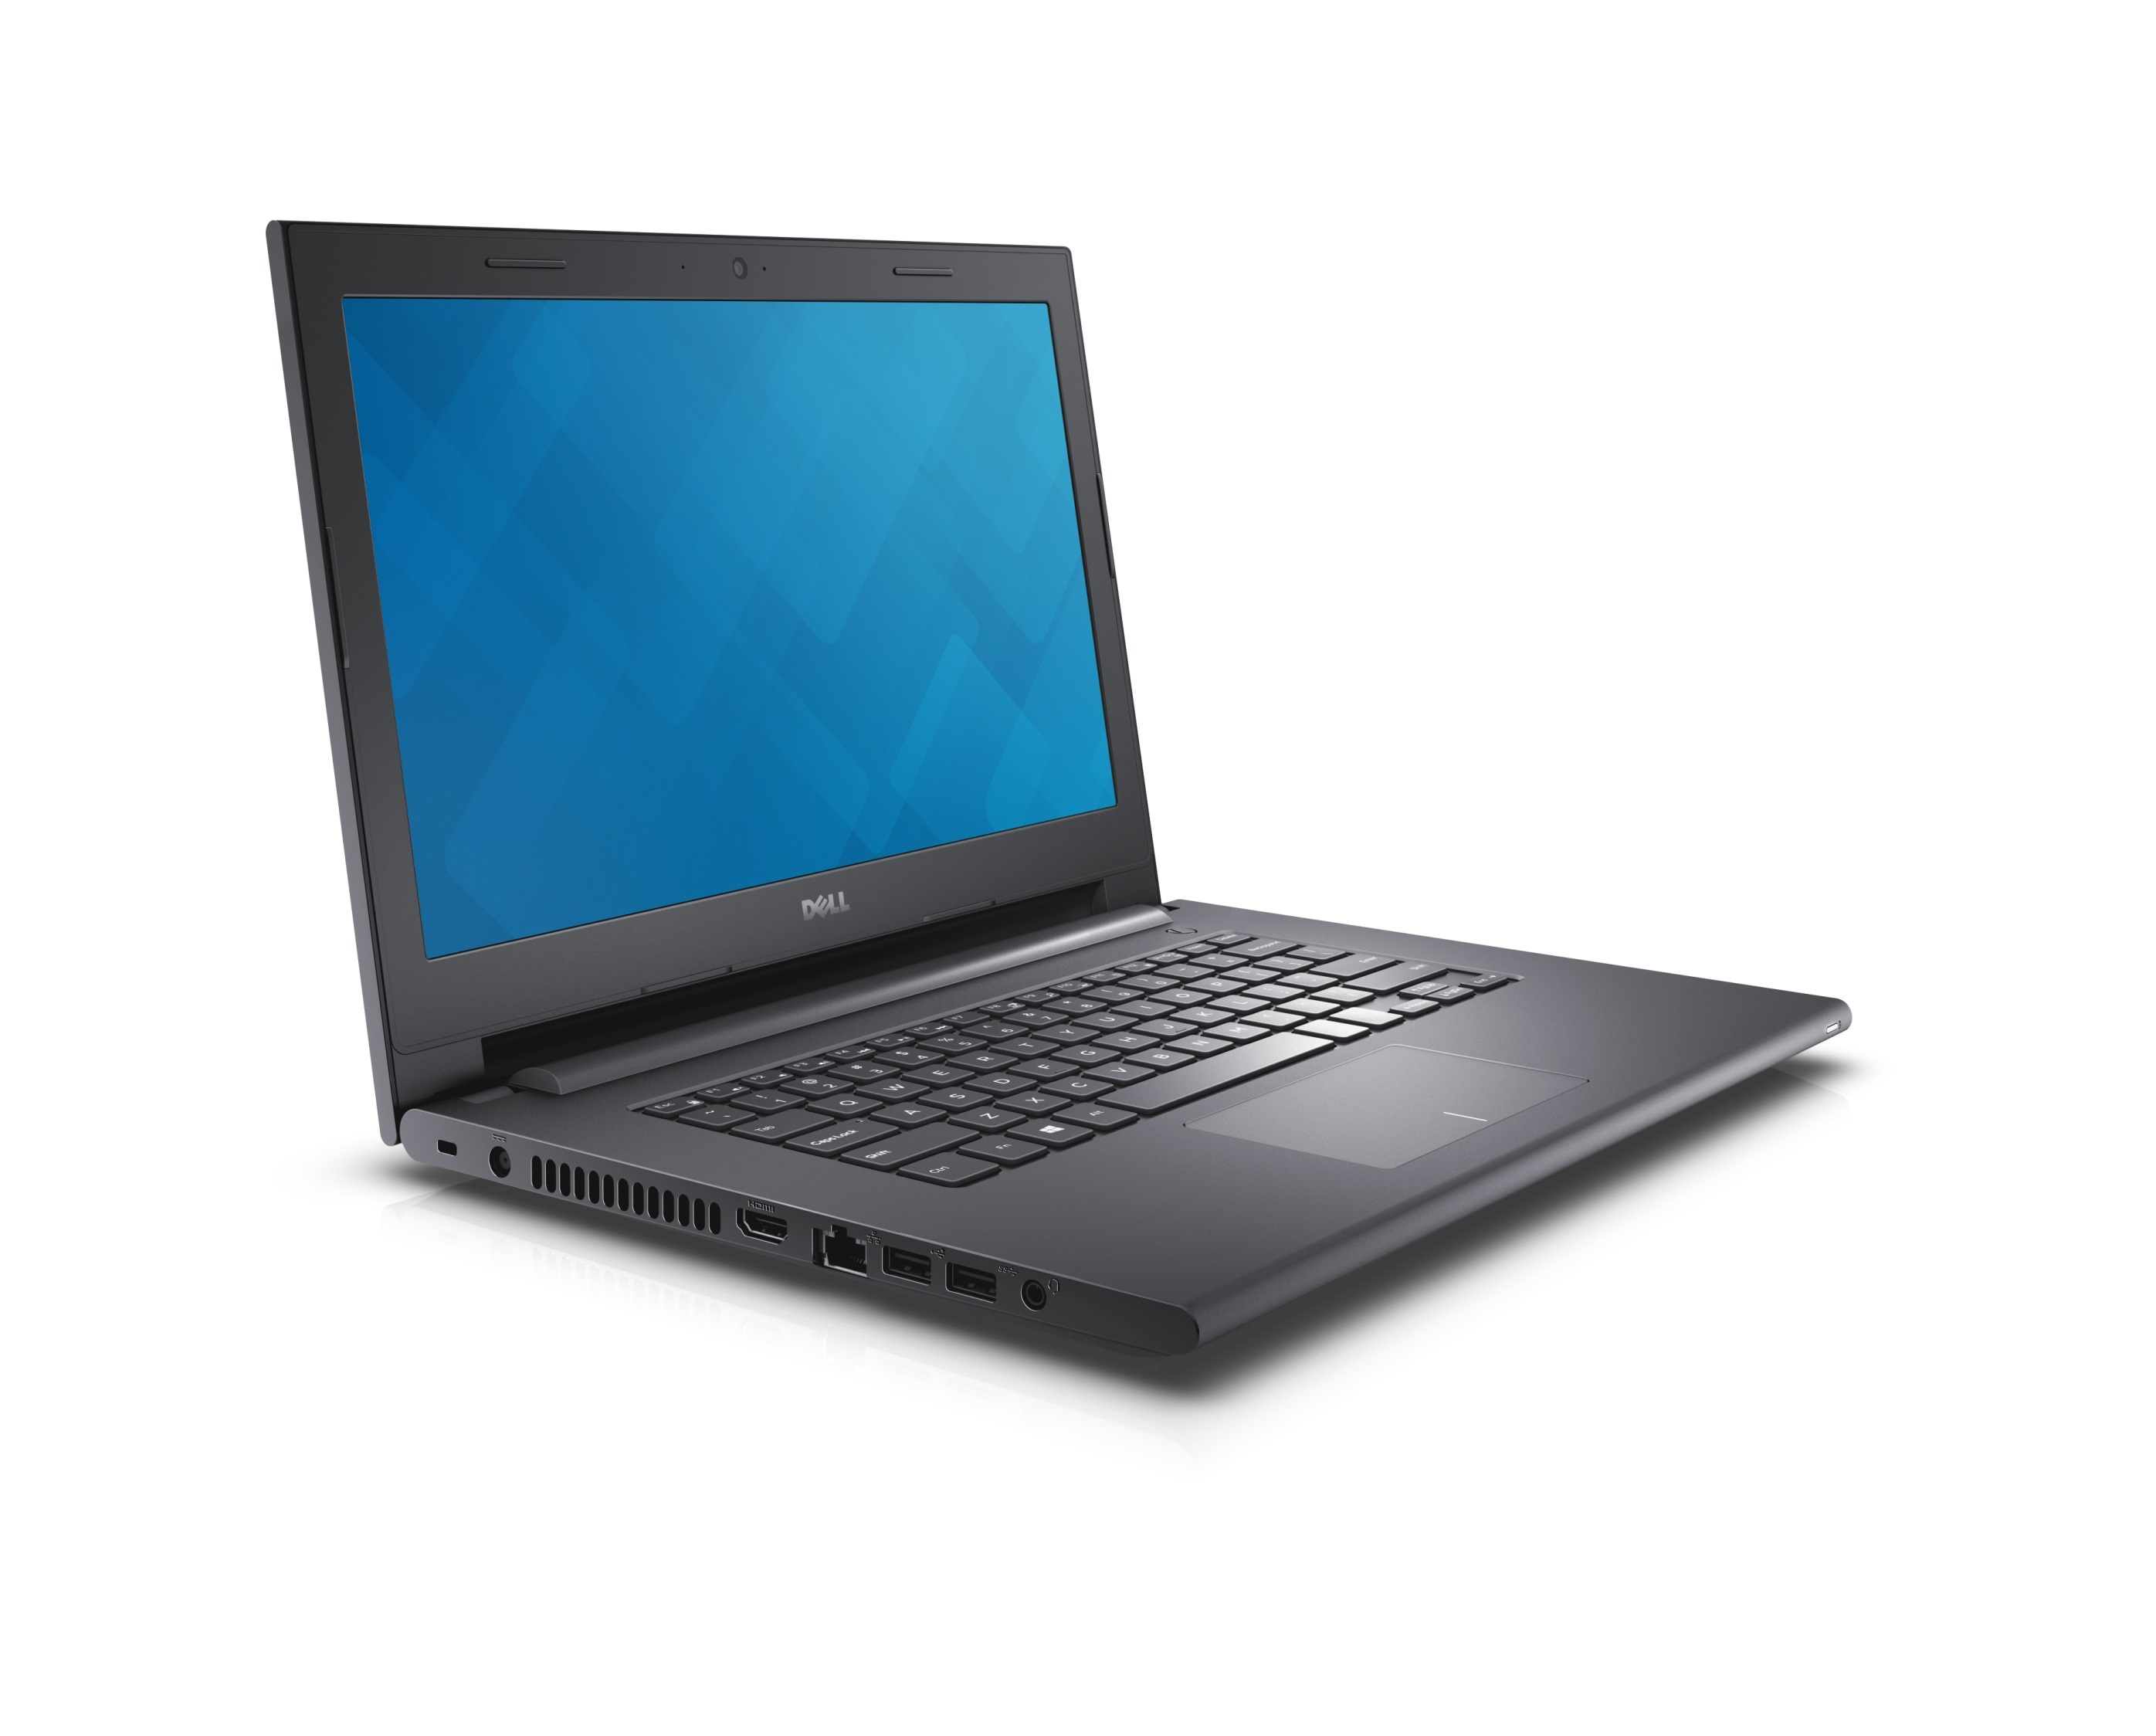 Dell 15 3000 series. Ноутбук dell Inspiron 3542. Dell Inspiron 3542. Dell Inspiron 15 3000. Ноутбук dell Inspiron 15 3000 Series.